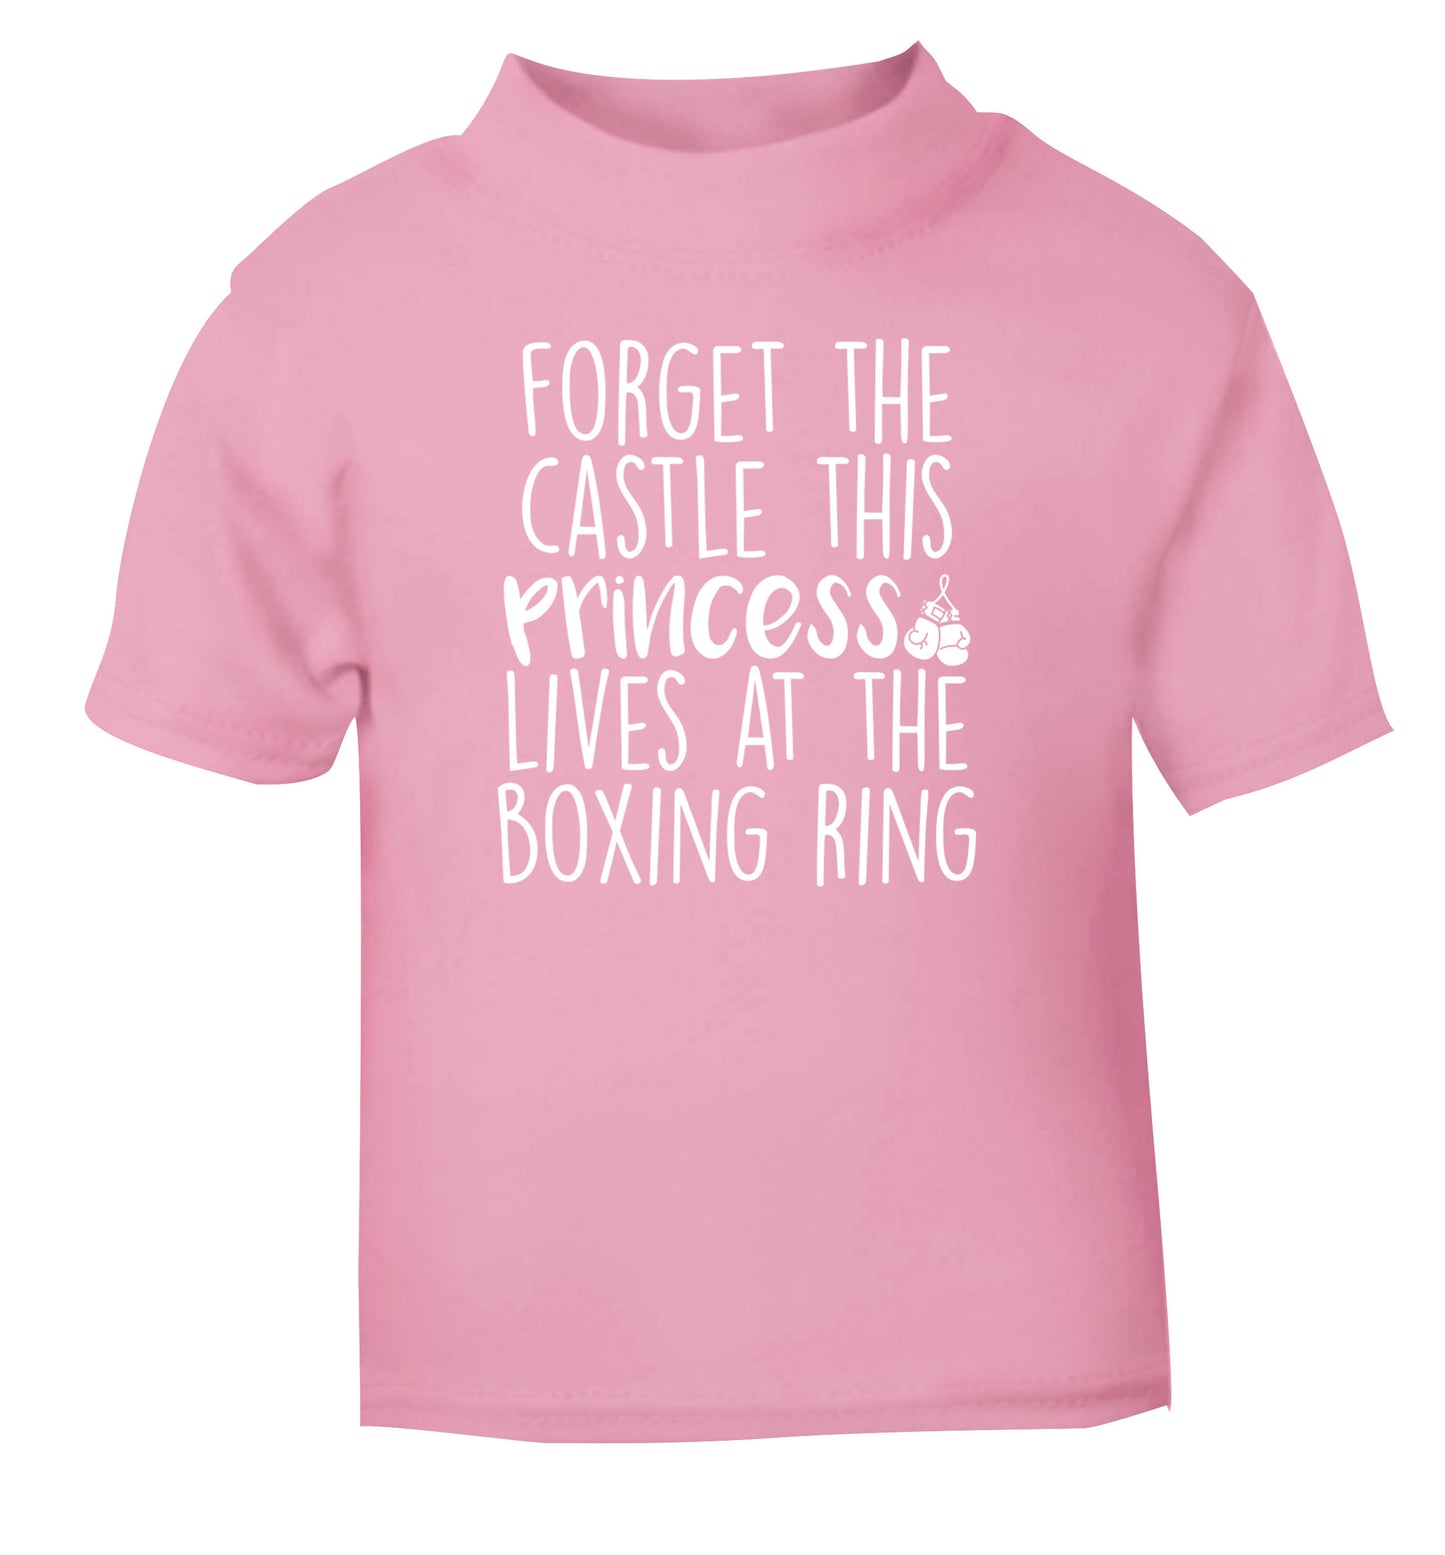 Forget the castle this princess lives at the boxing ring light pink Baby Toddler Tshirt 2 Years